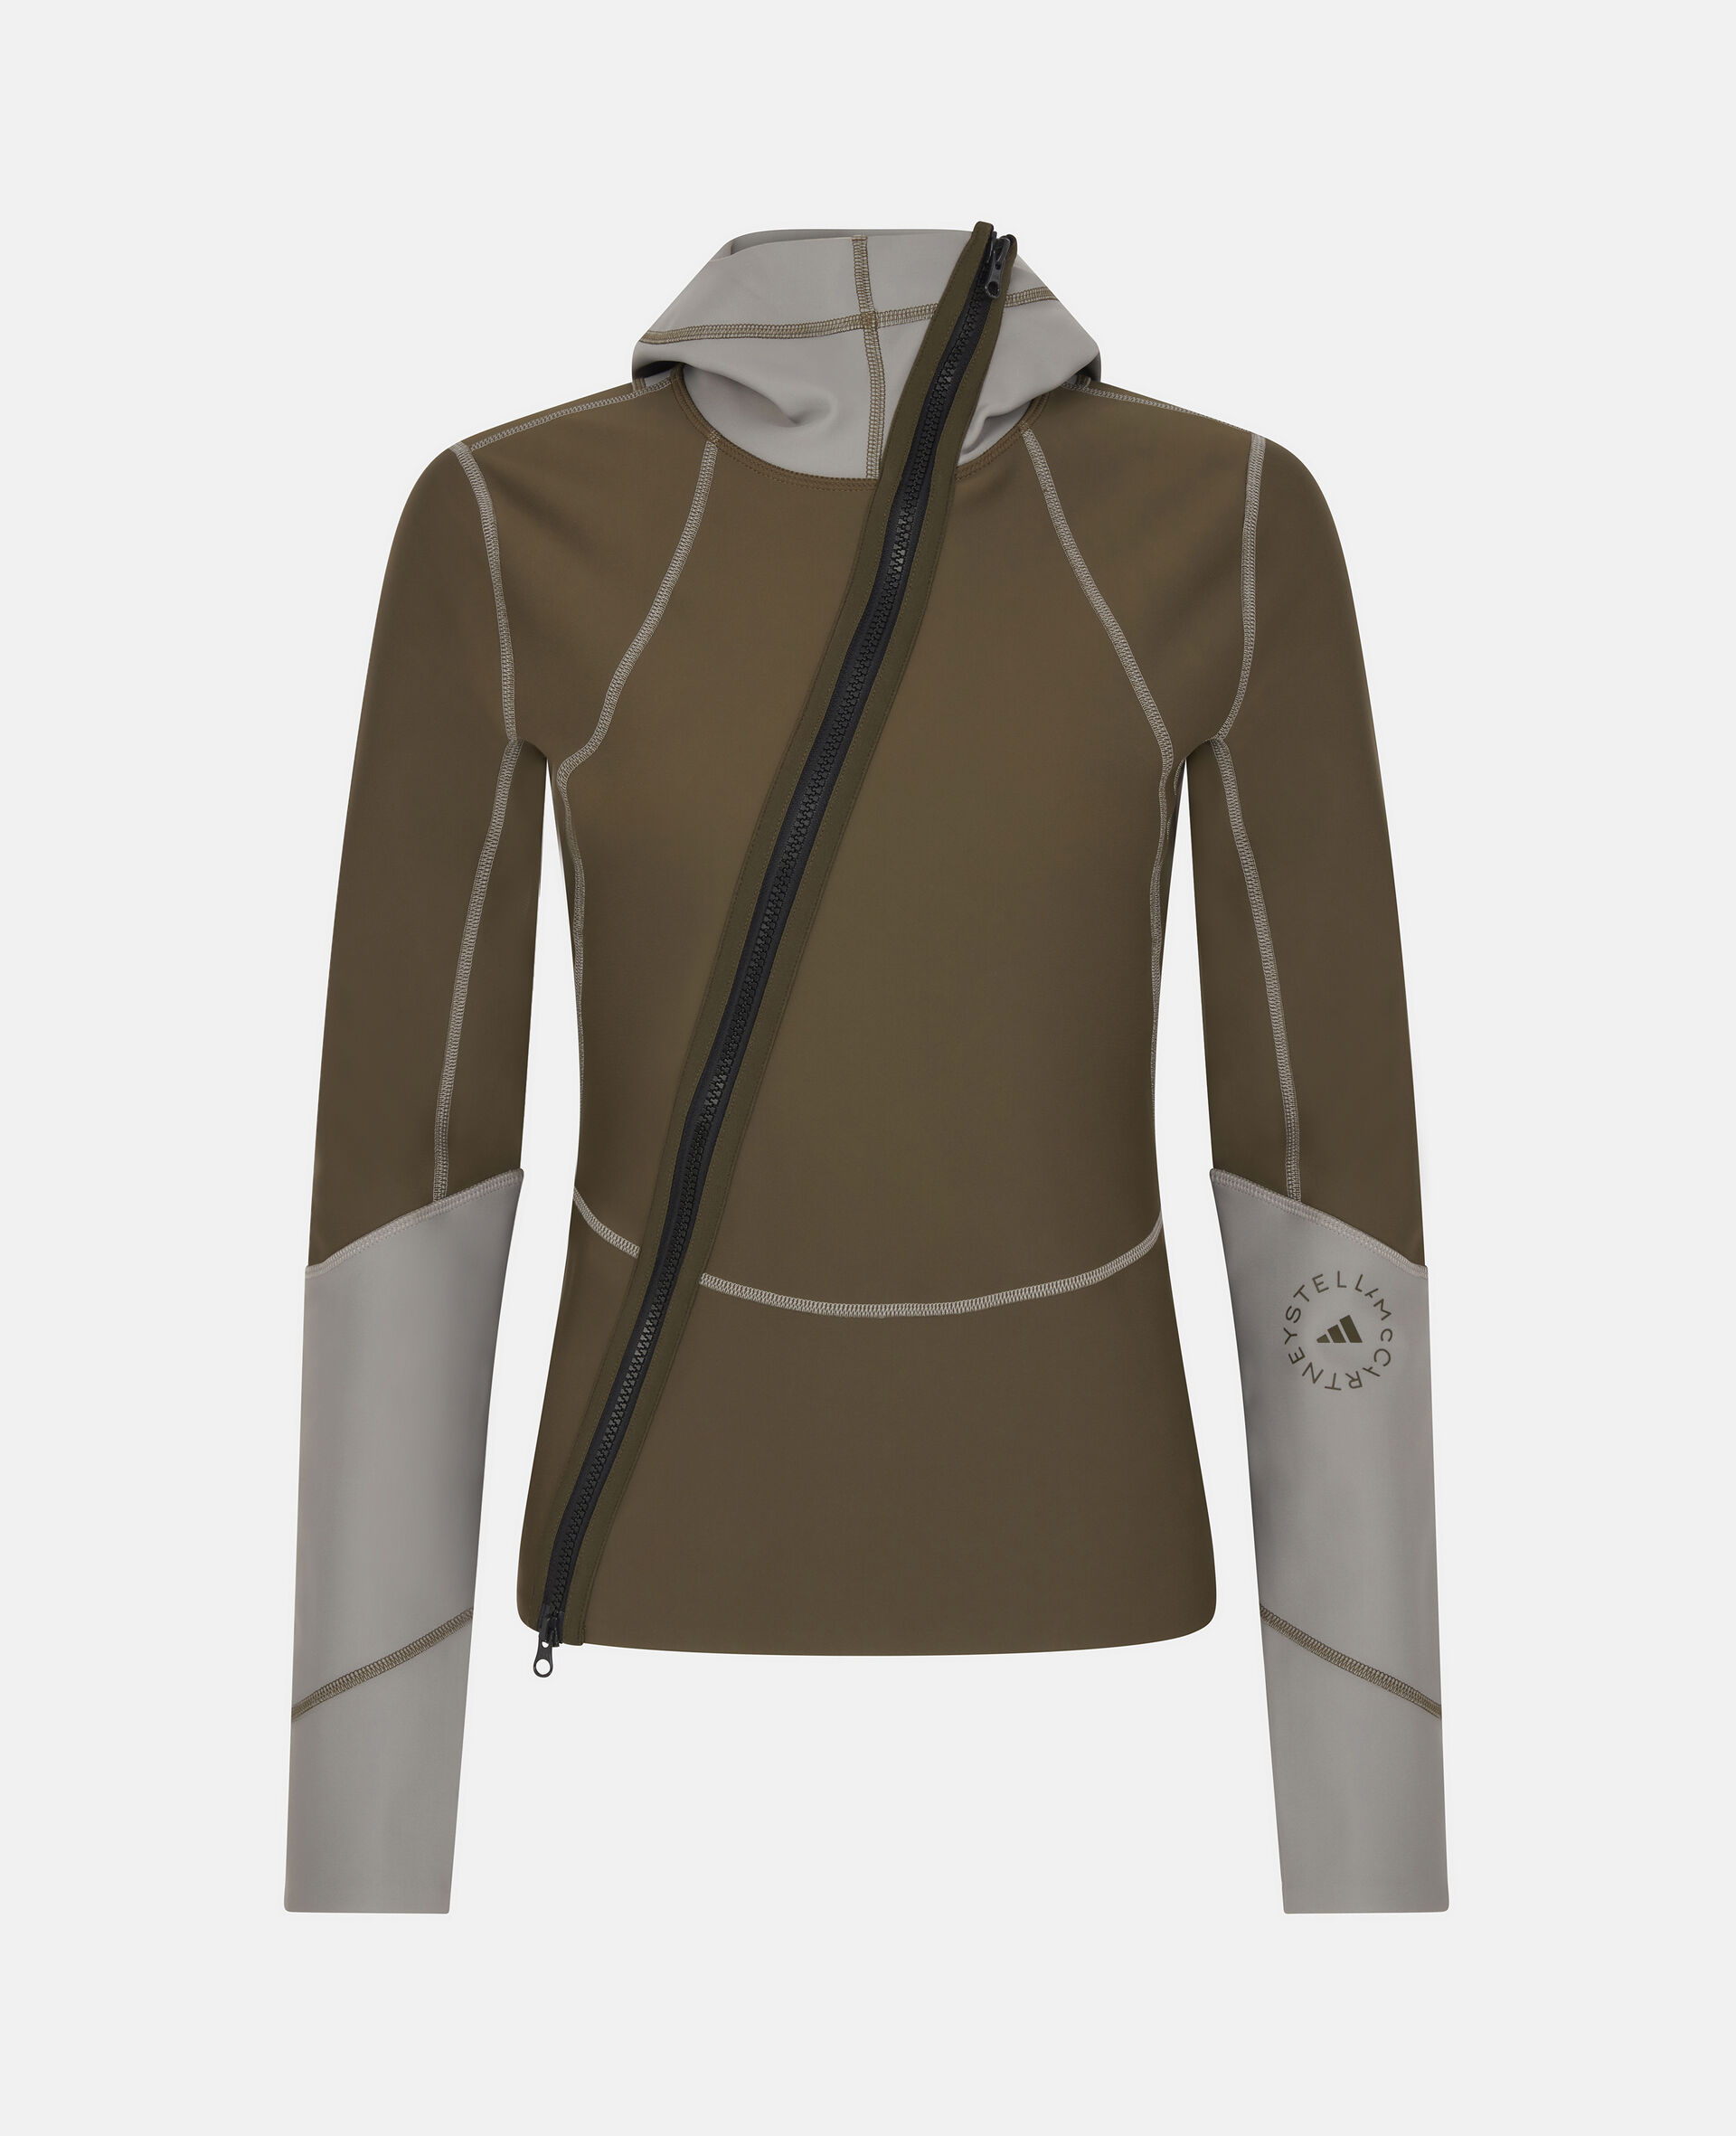 Dark Khaki and Dove Gray Earth Protector Track Top-Multicolour-large image number 0